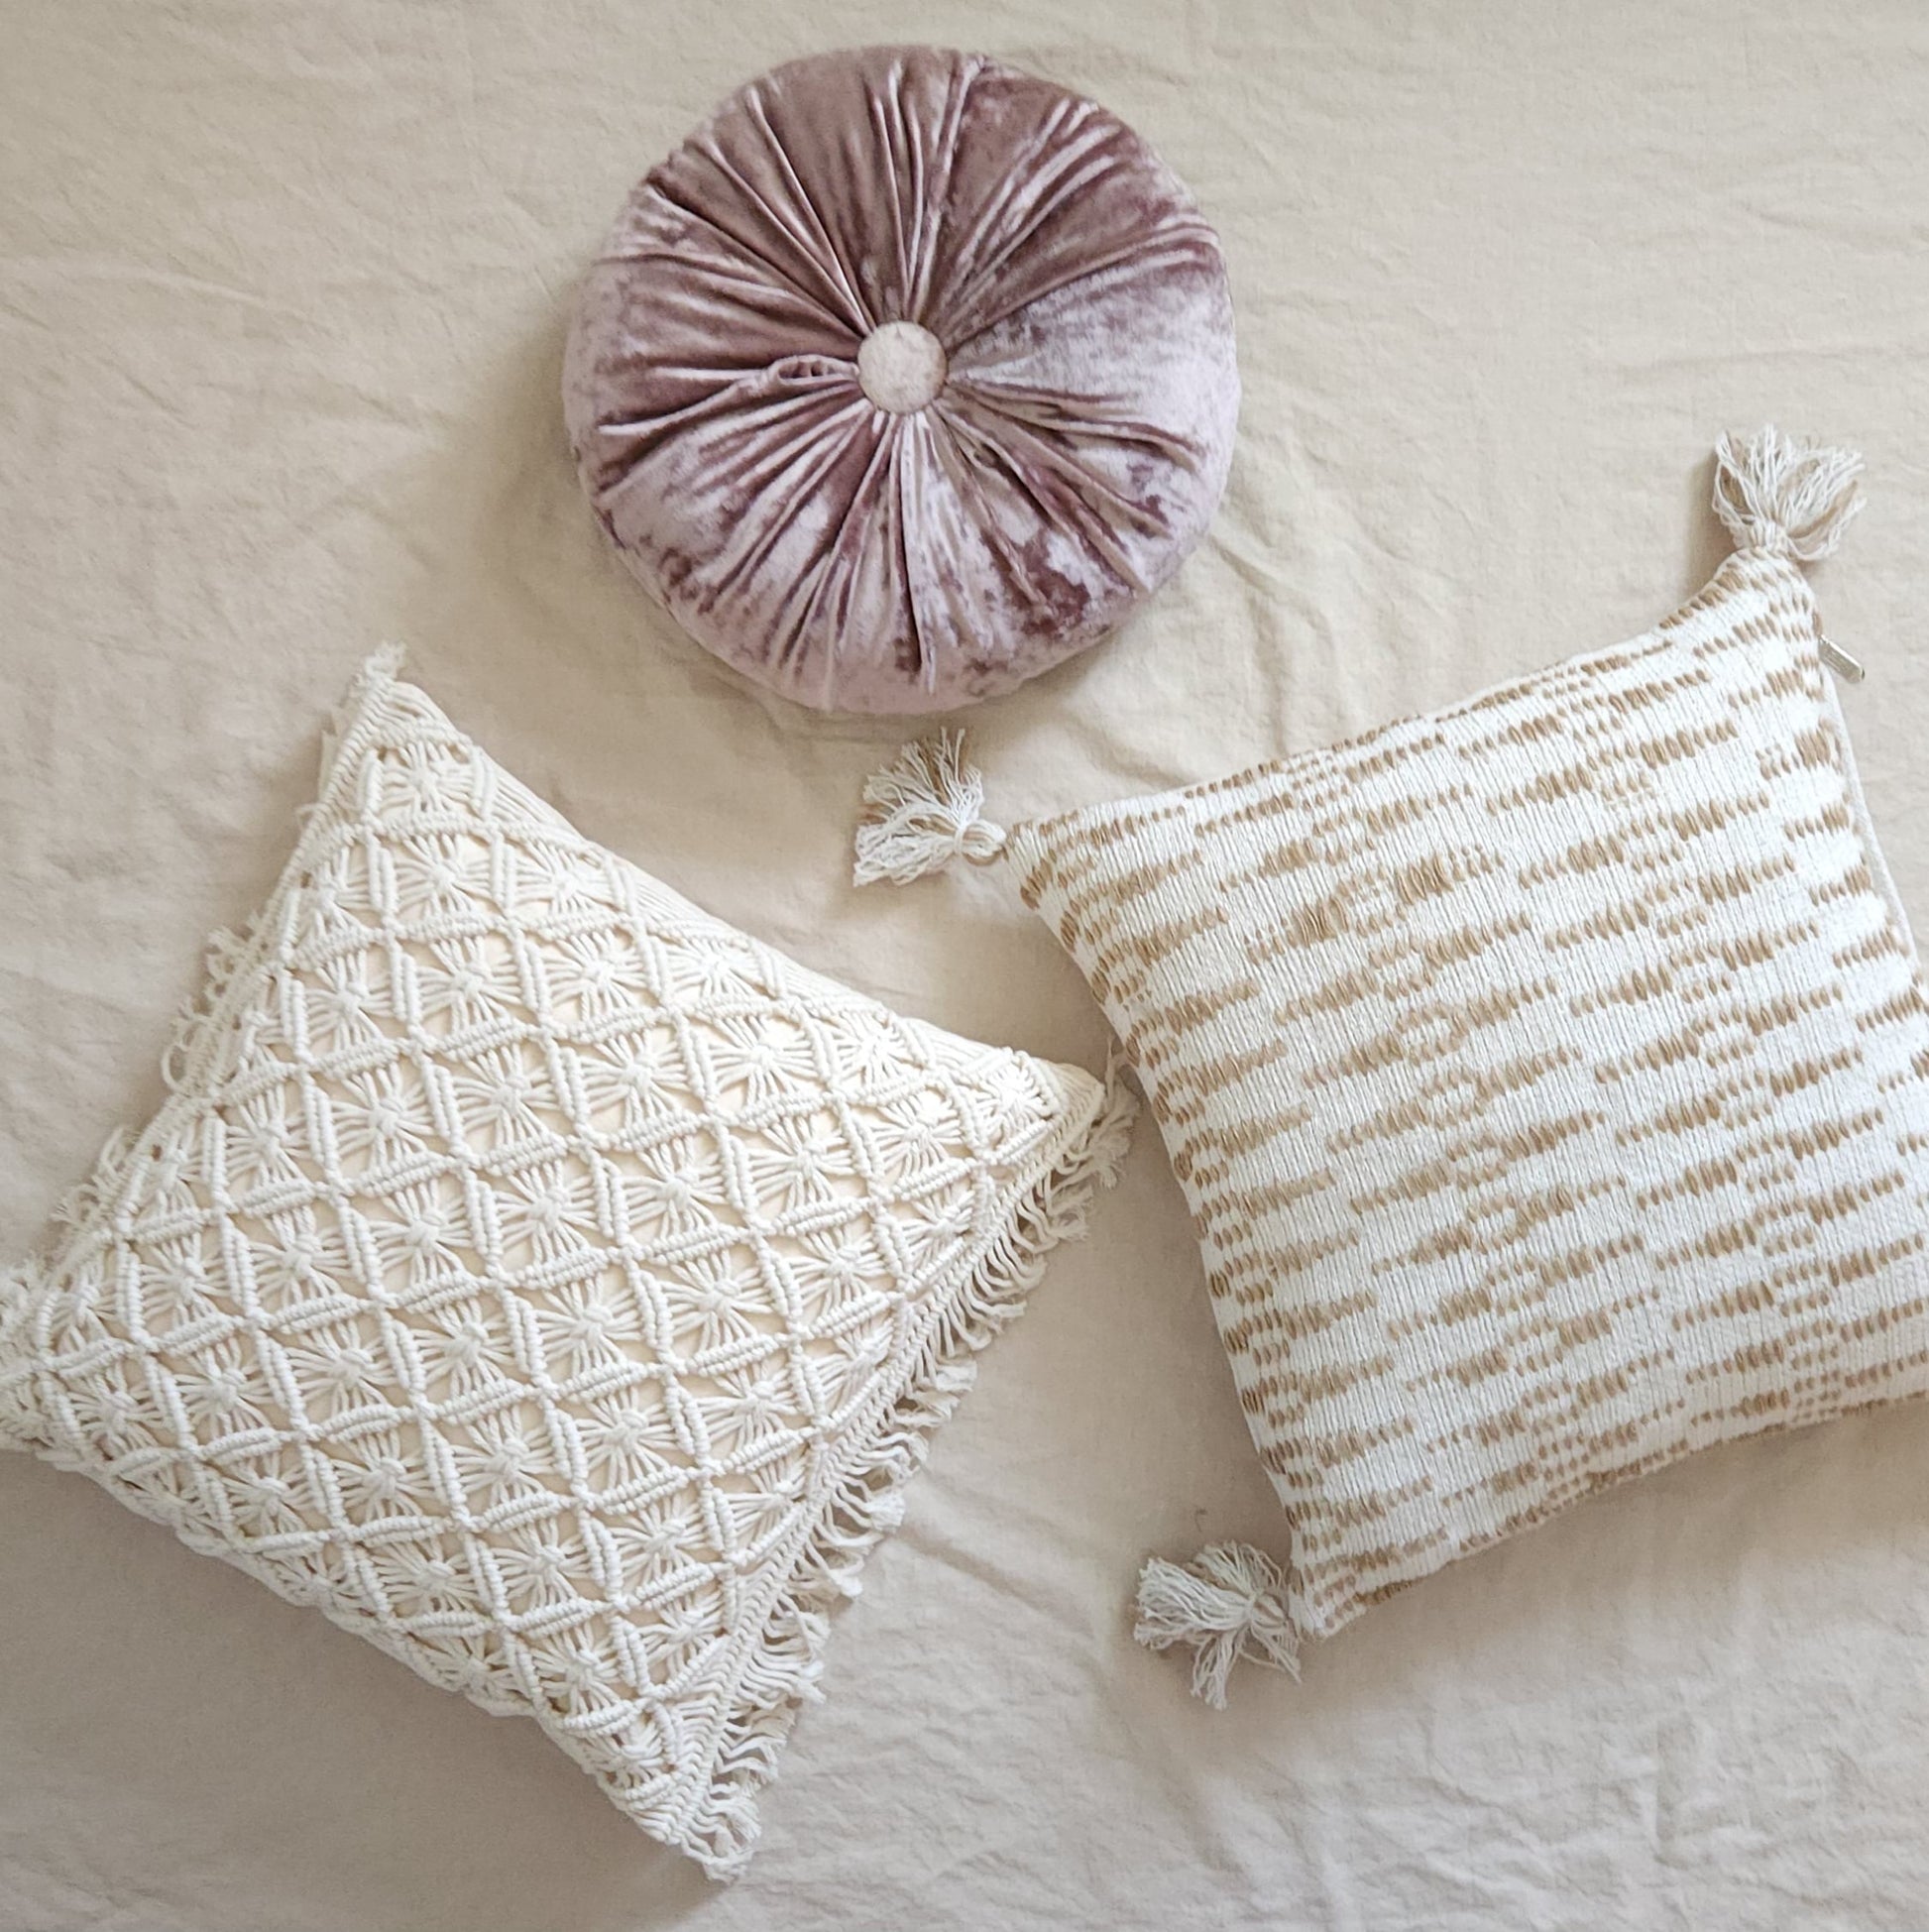 Lucille Lilac & Tan Glam Boho Chic Pillow Cover Combo | Dusk & Bloom